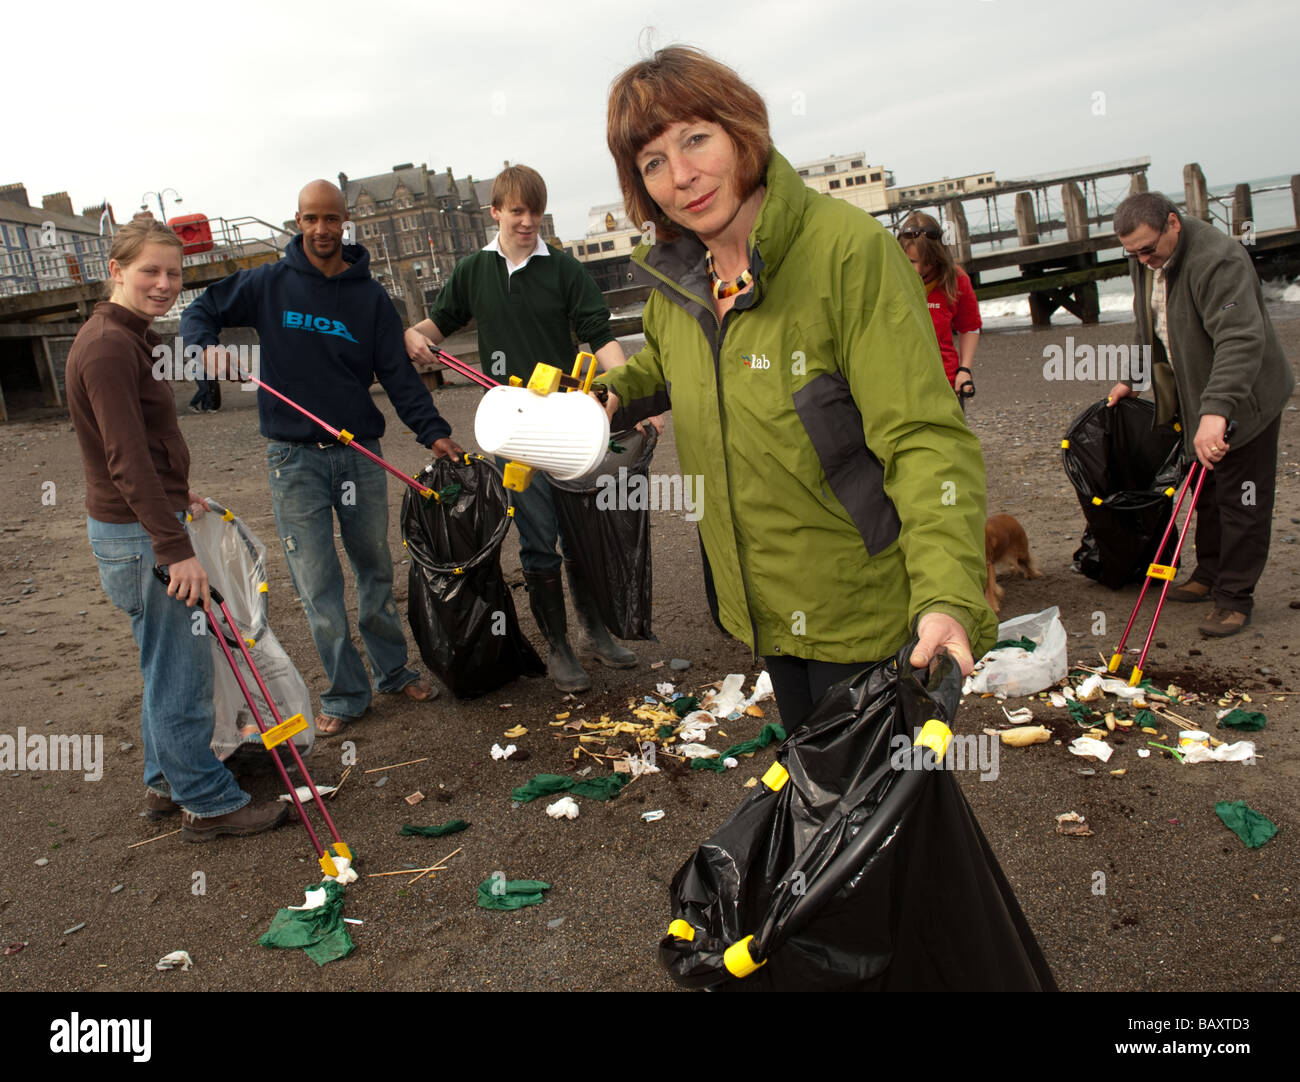 Wales Assembly minister Jane Davidson at the launch of the Tidy Wales campaign collecting litter trash off Aberystwyth beach UK Stock Photo